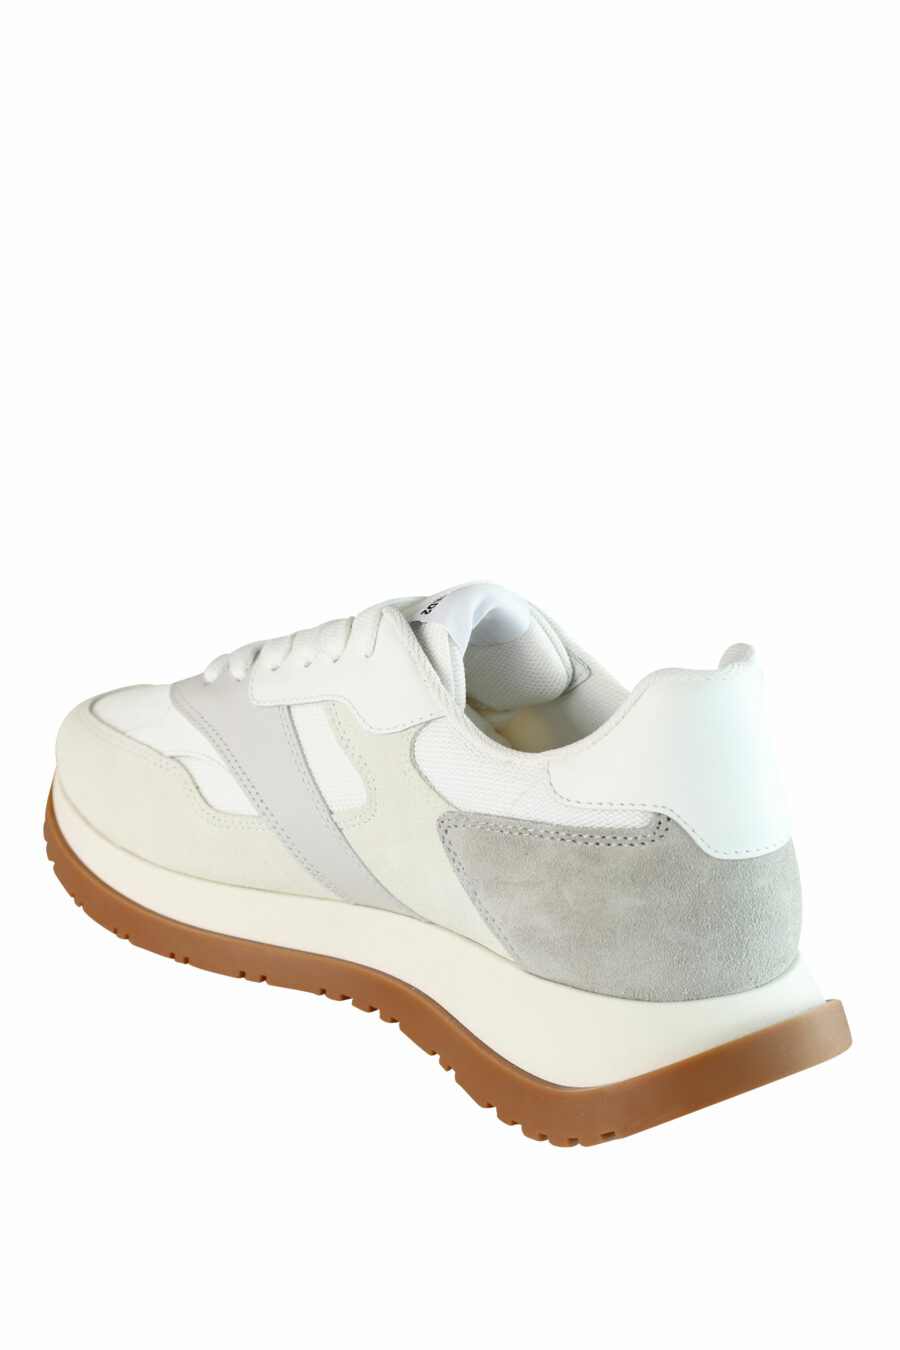 White running shoes with grey and beige details - IMG 1400